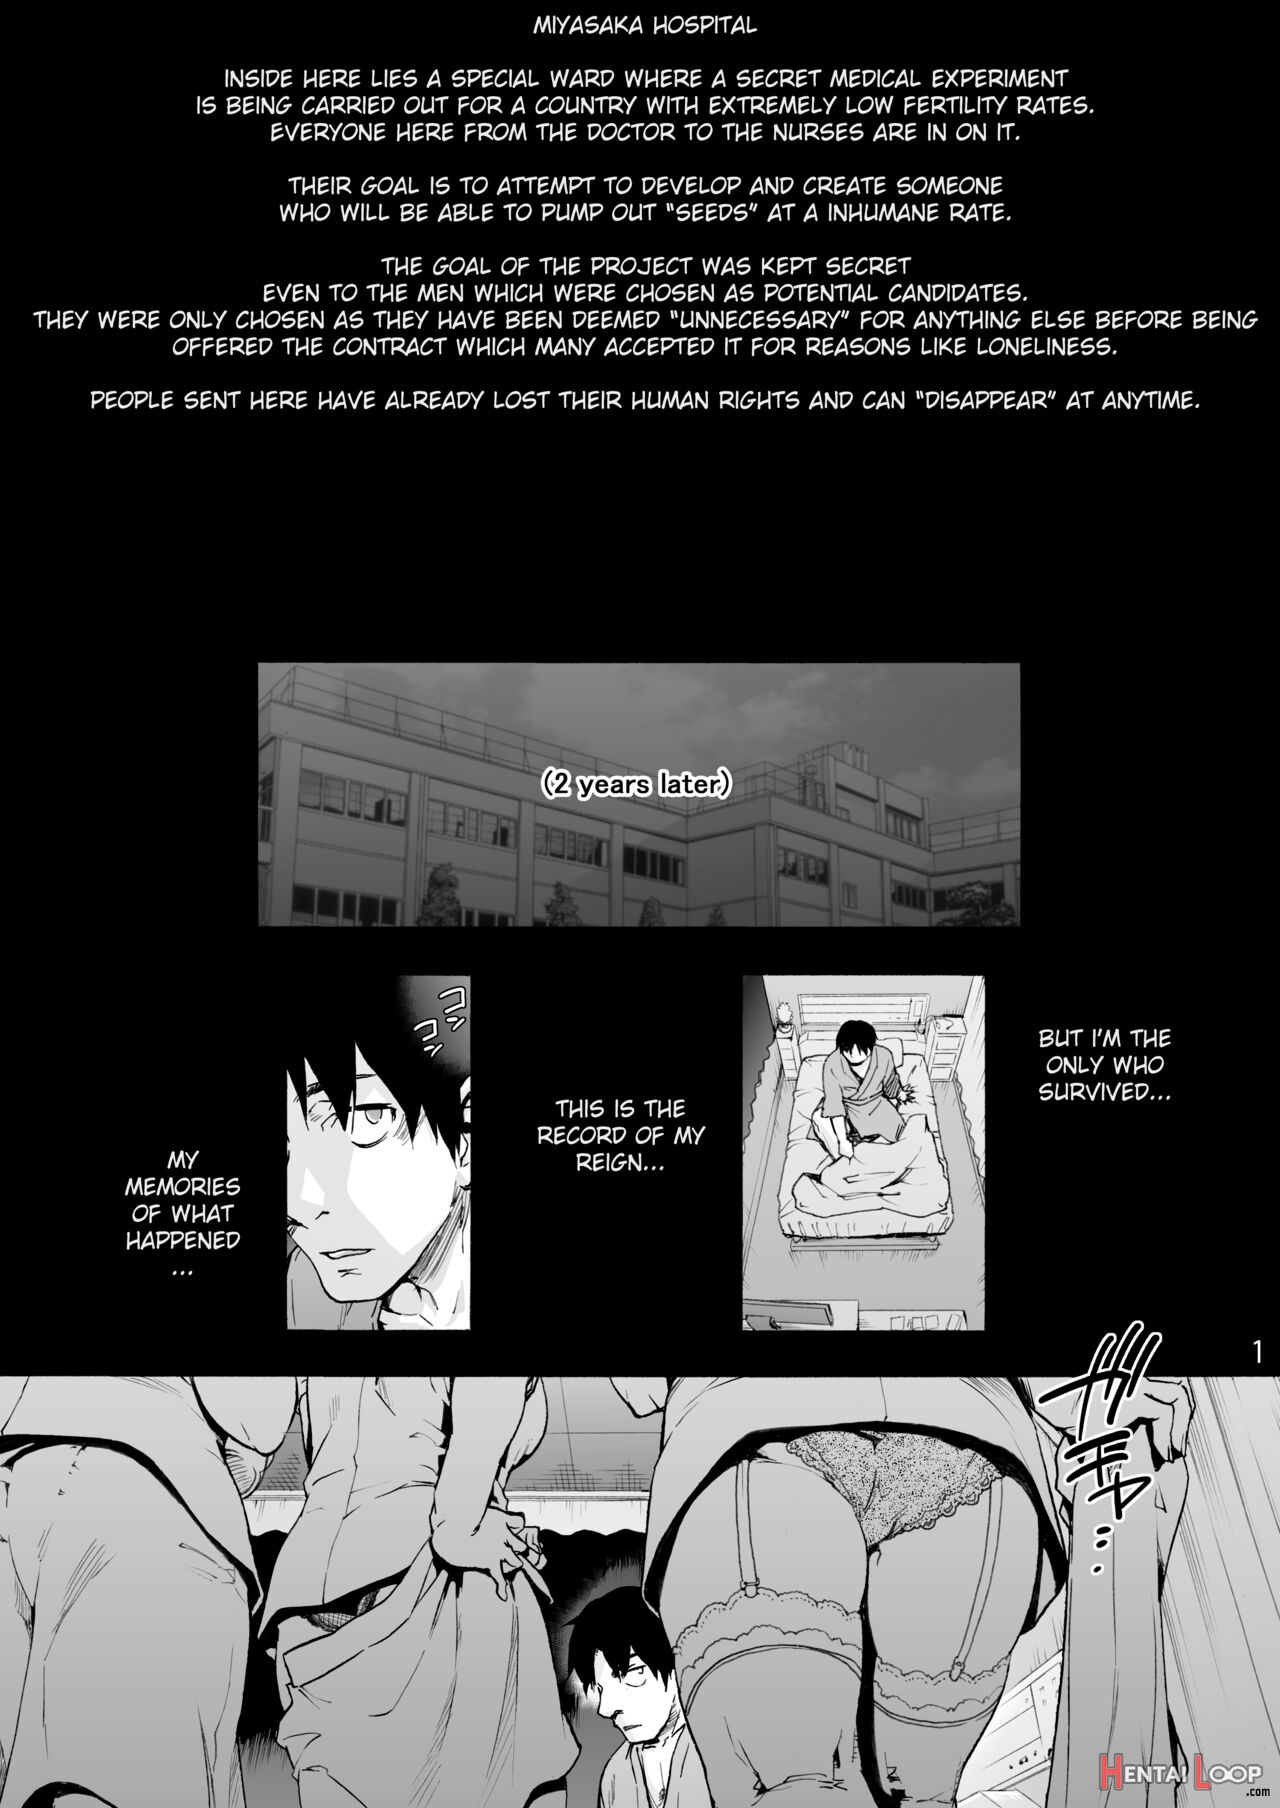 Miyasaka Hospital Final: From The Grave To The Cradle page 3